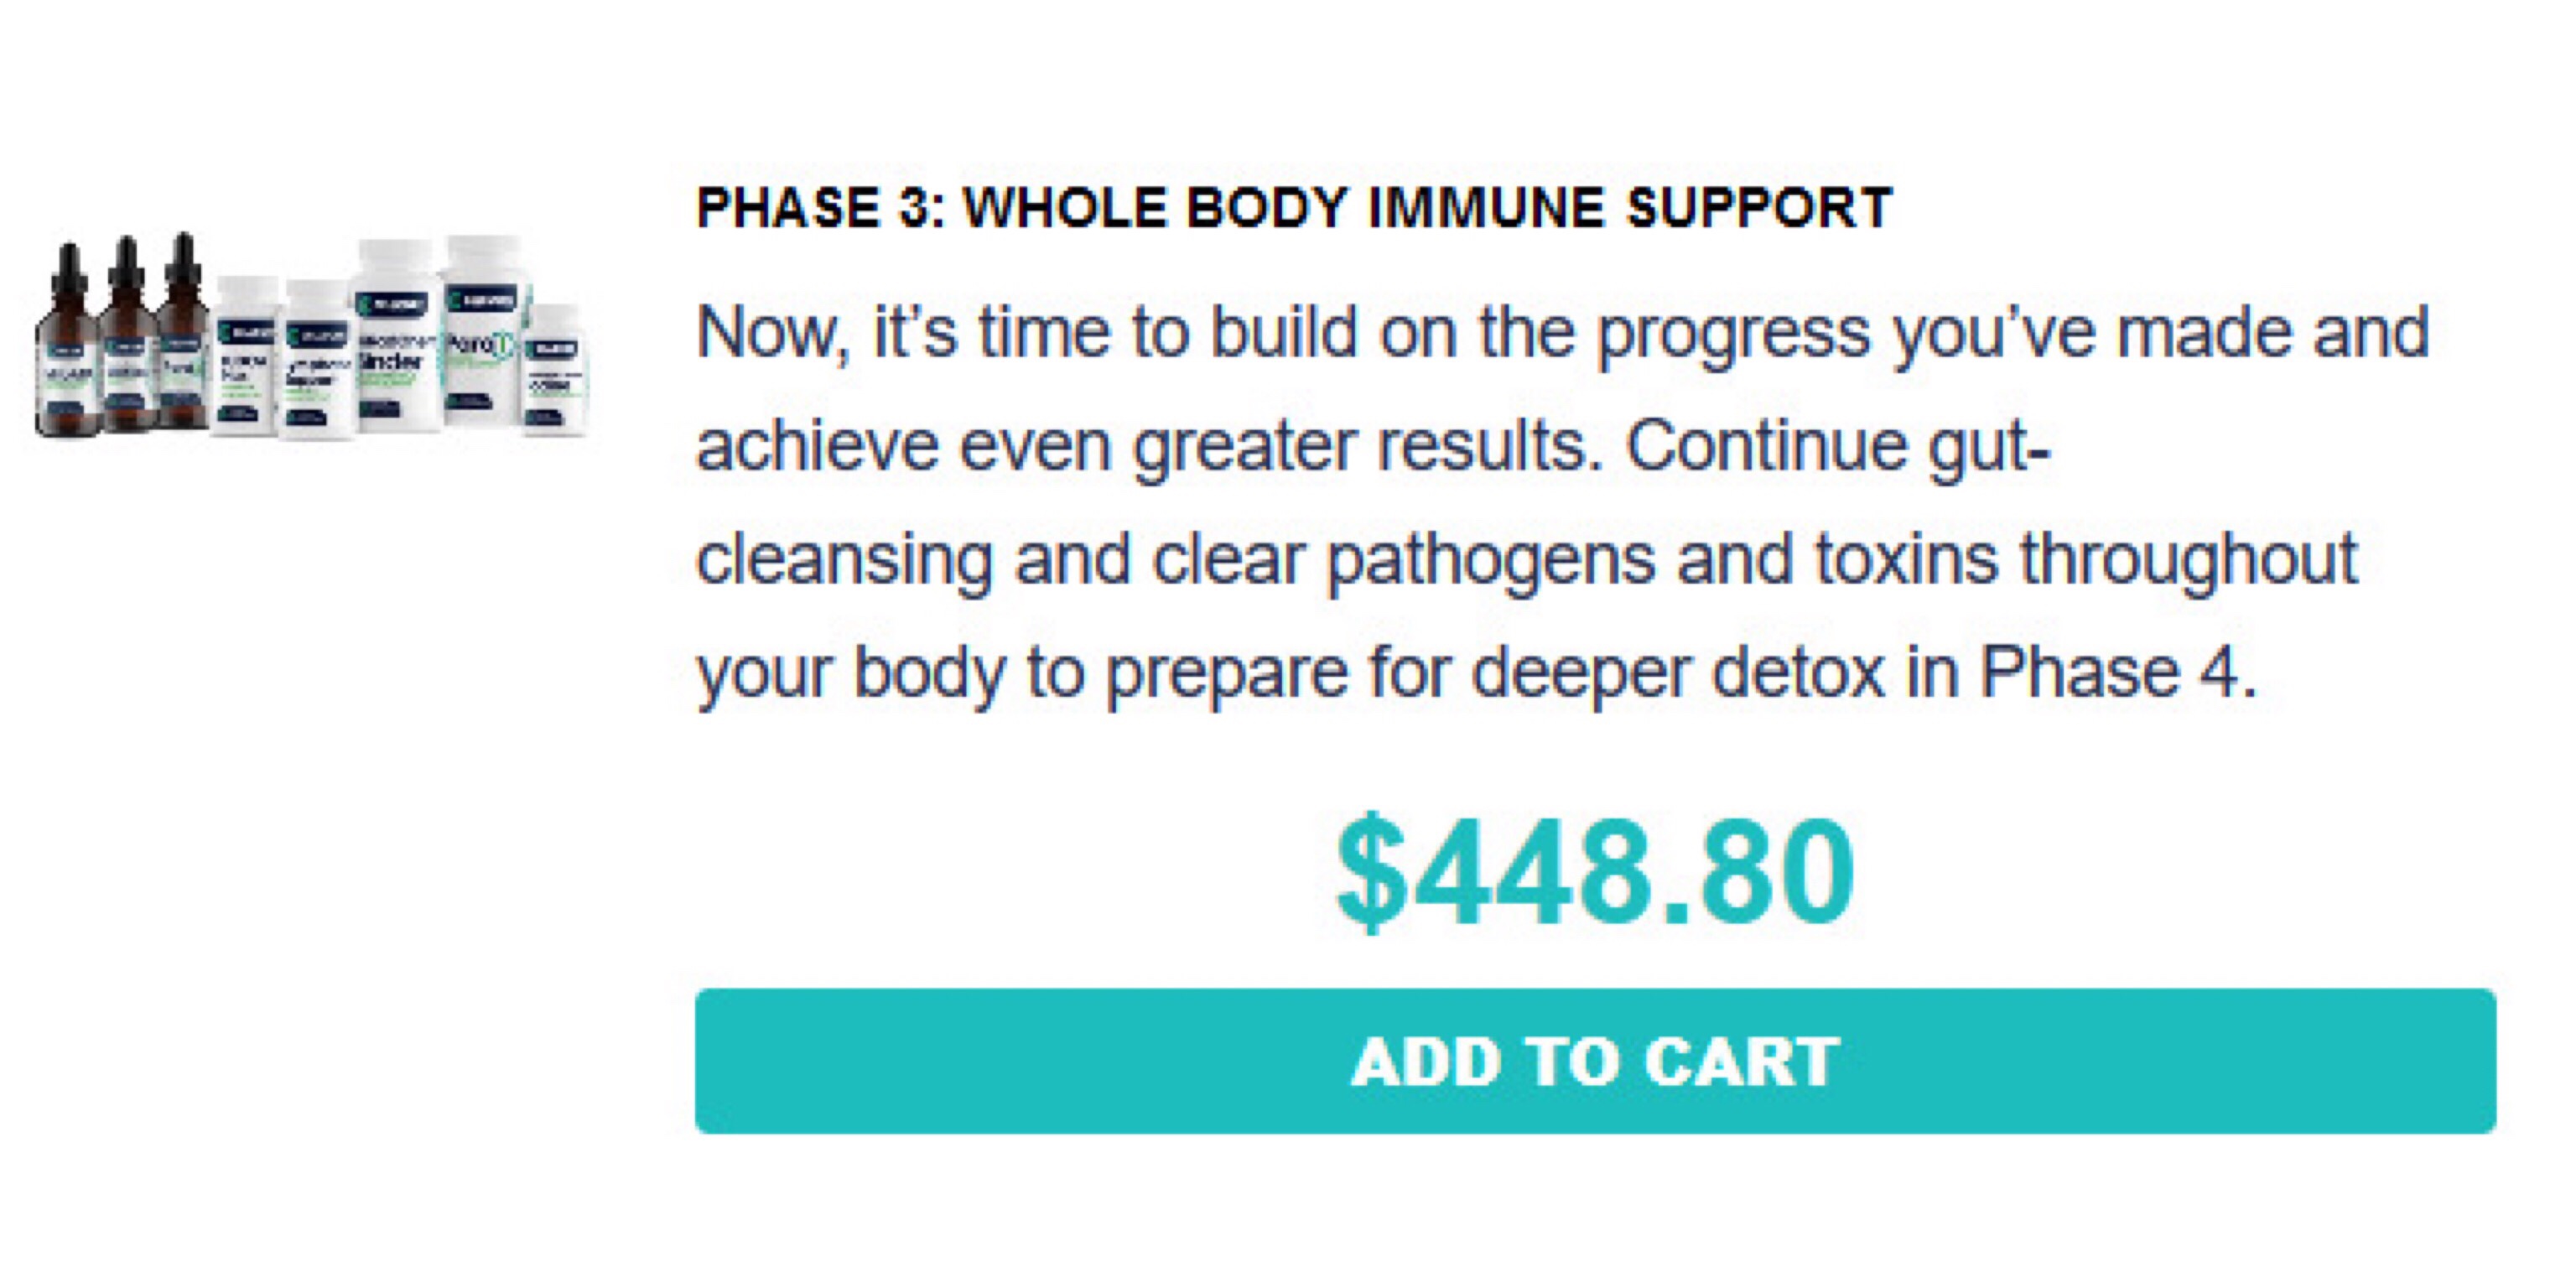 CellCore BioScience Phase 3 cost Immune Support